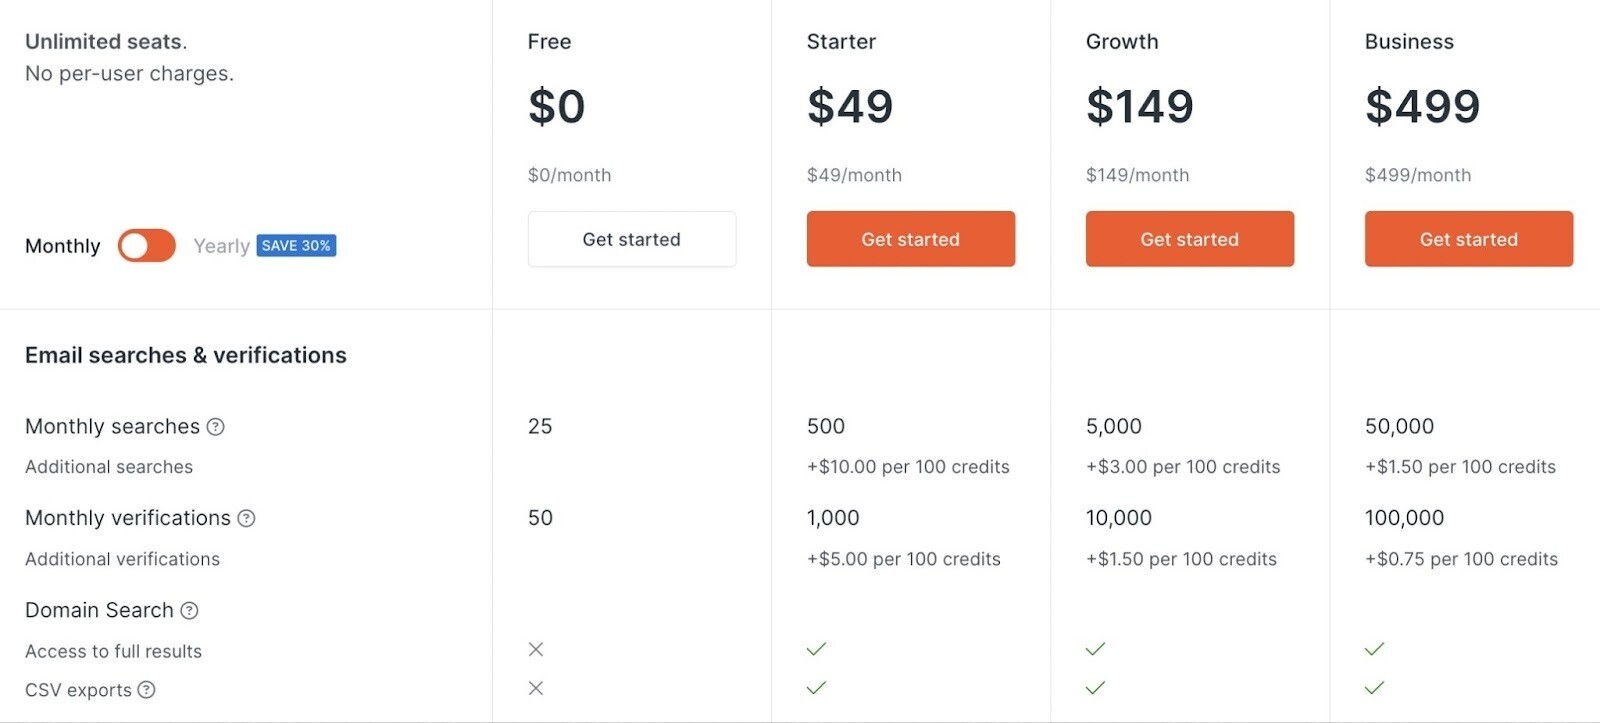 Hunter’s plans page showing prices from Starter, Growth and Business plans